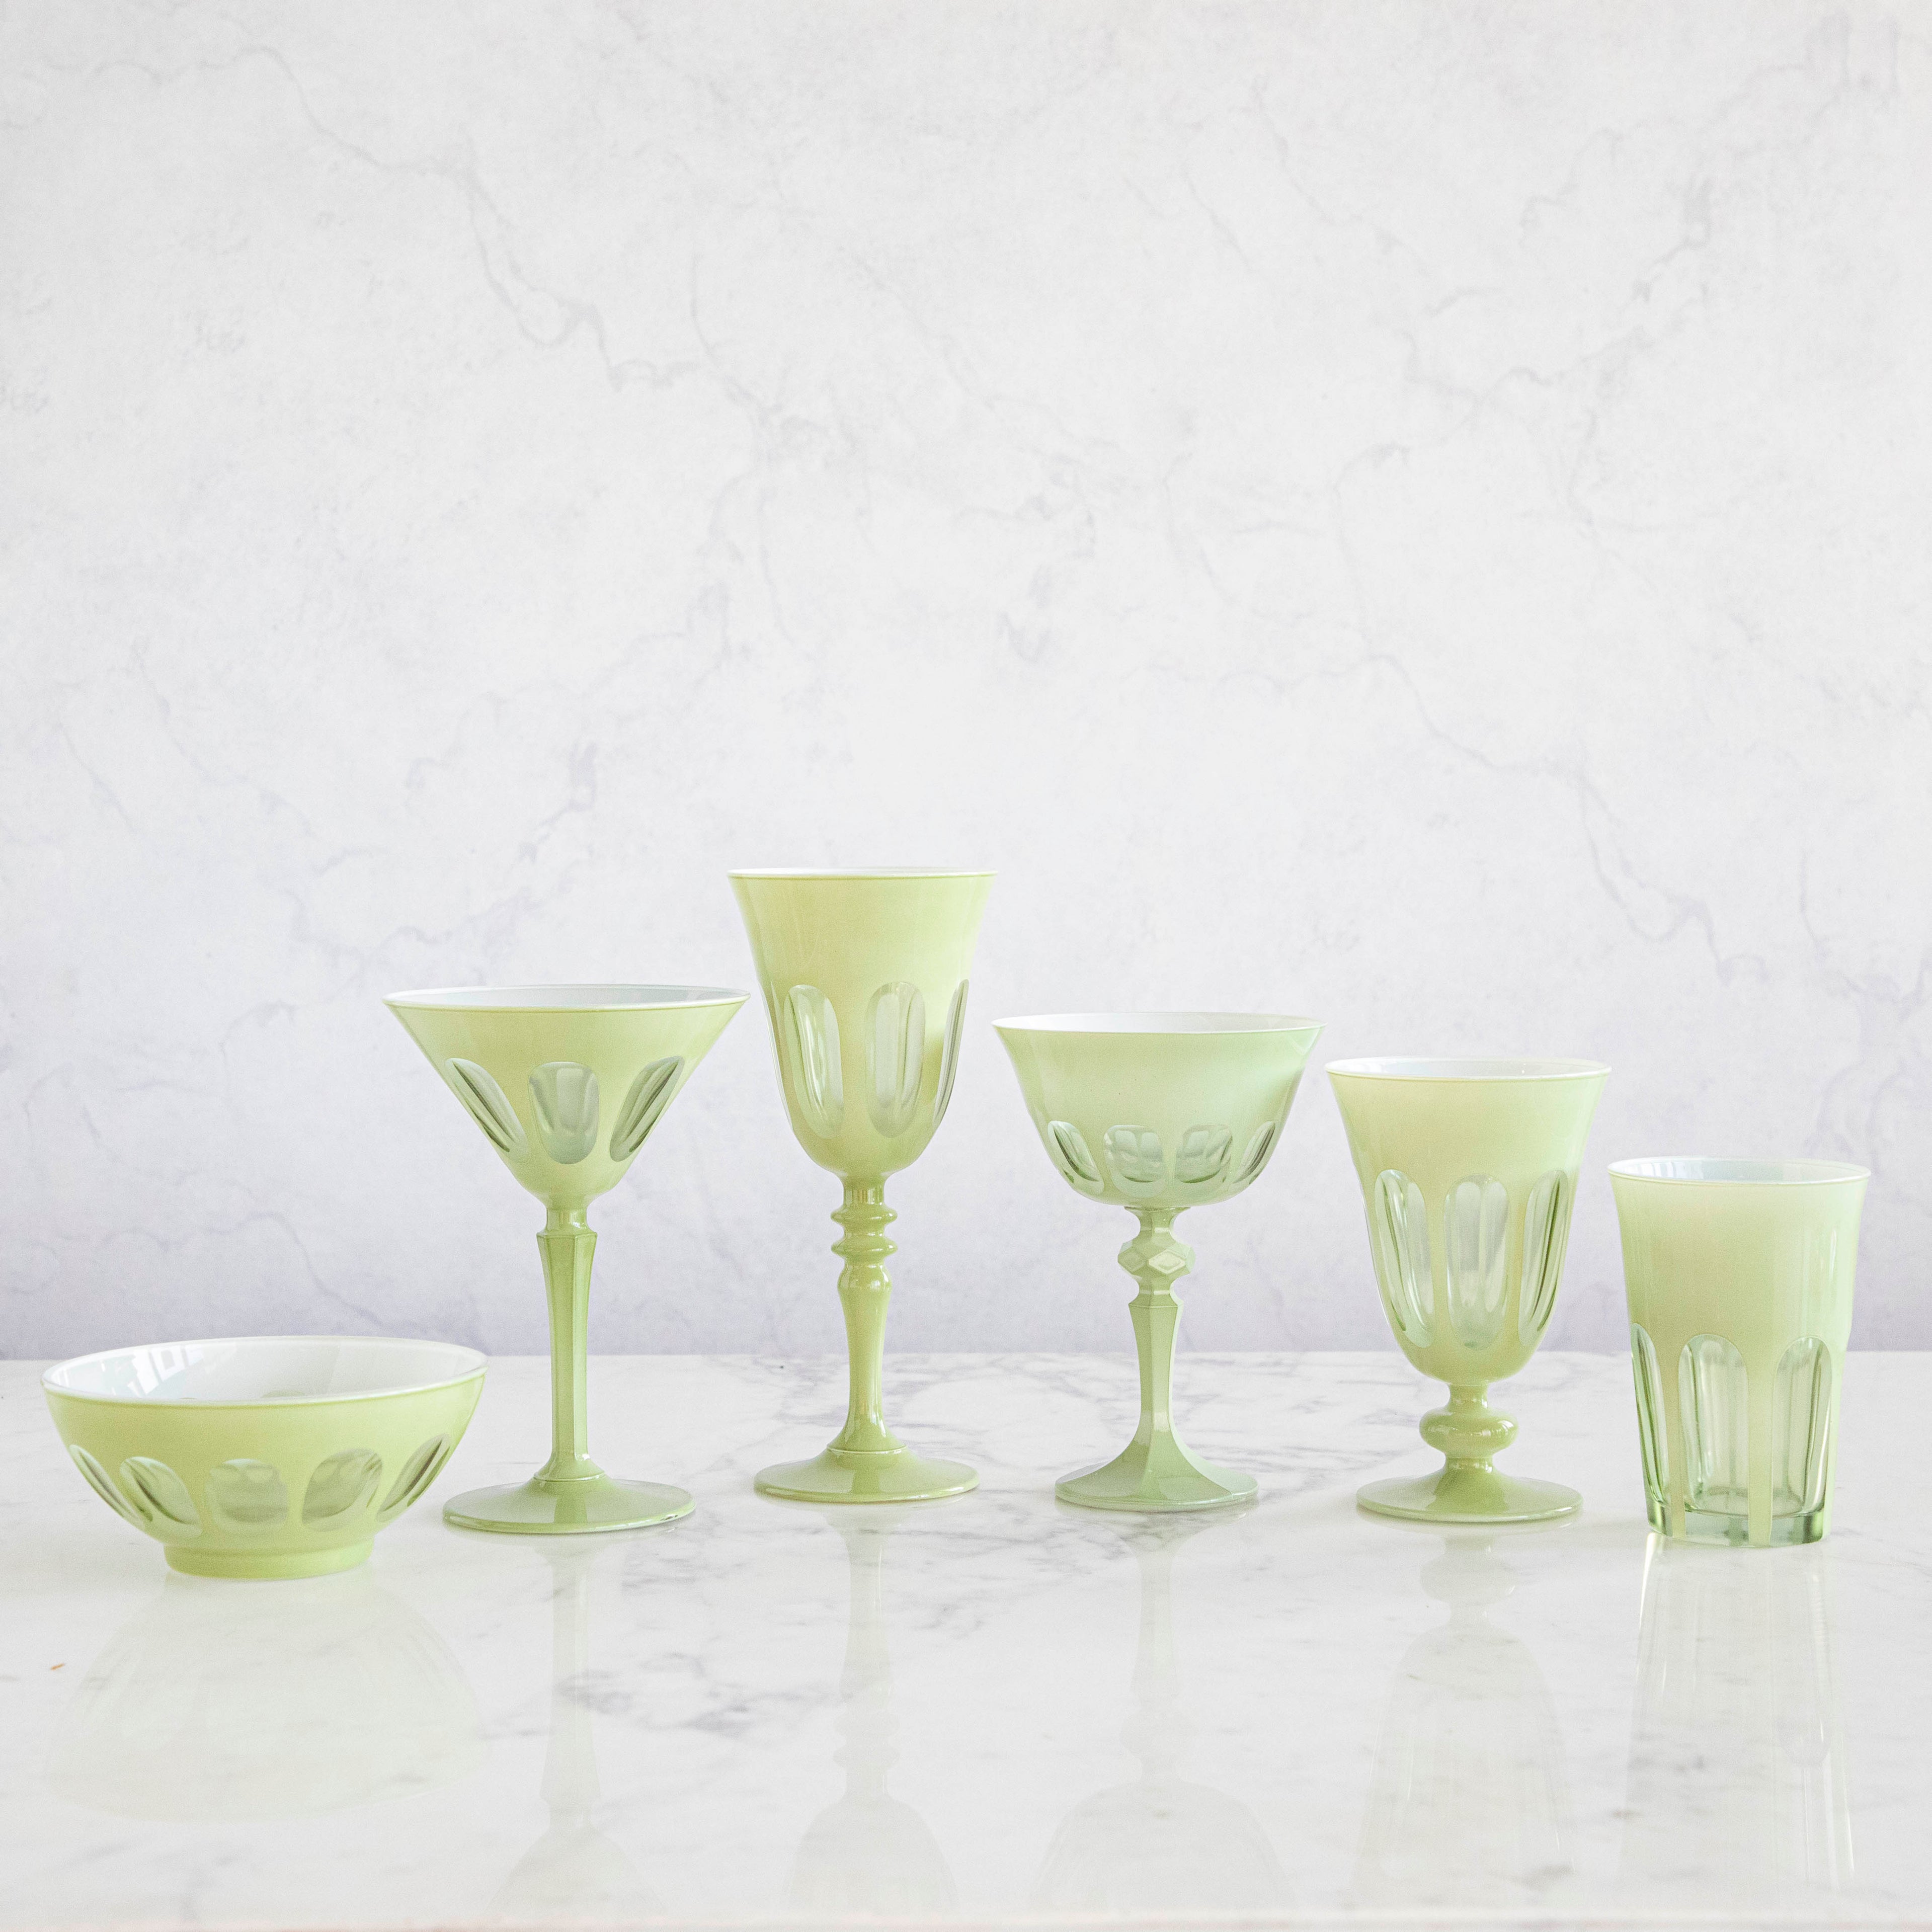 A set of Rialto Pale Sage glass bowls by SIR/MADAM on a marble surface against a marble backdrop.